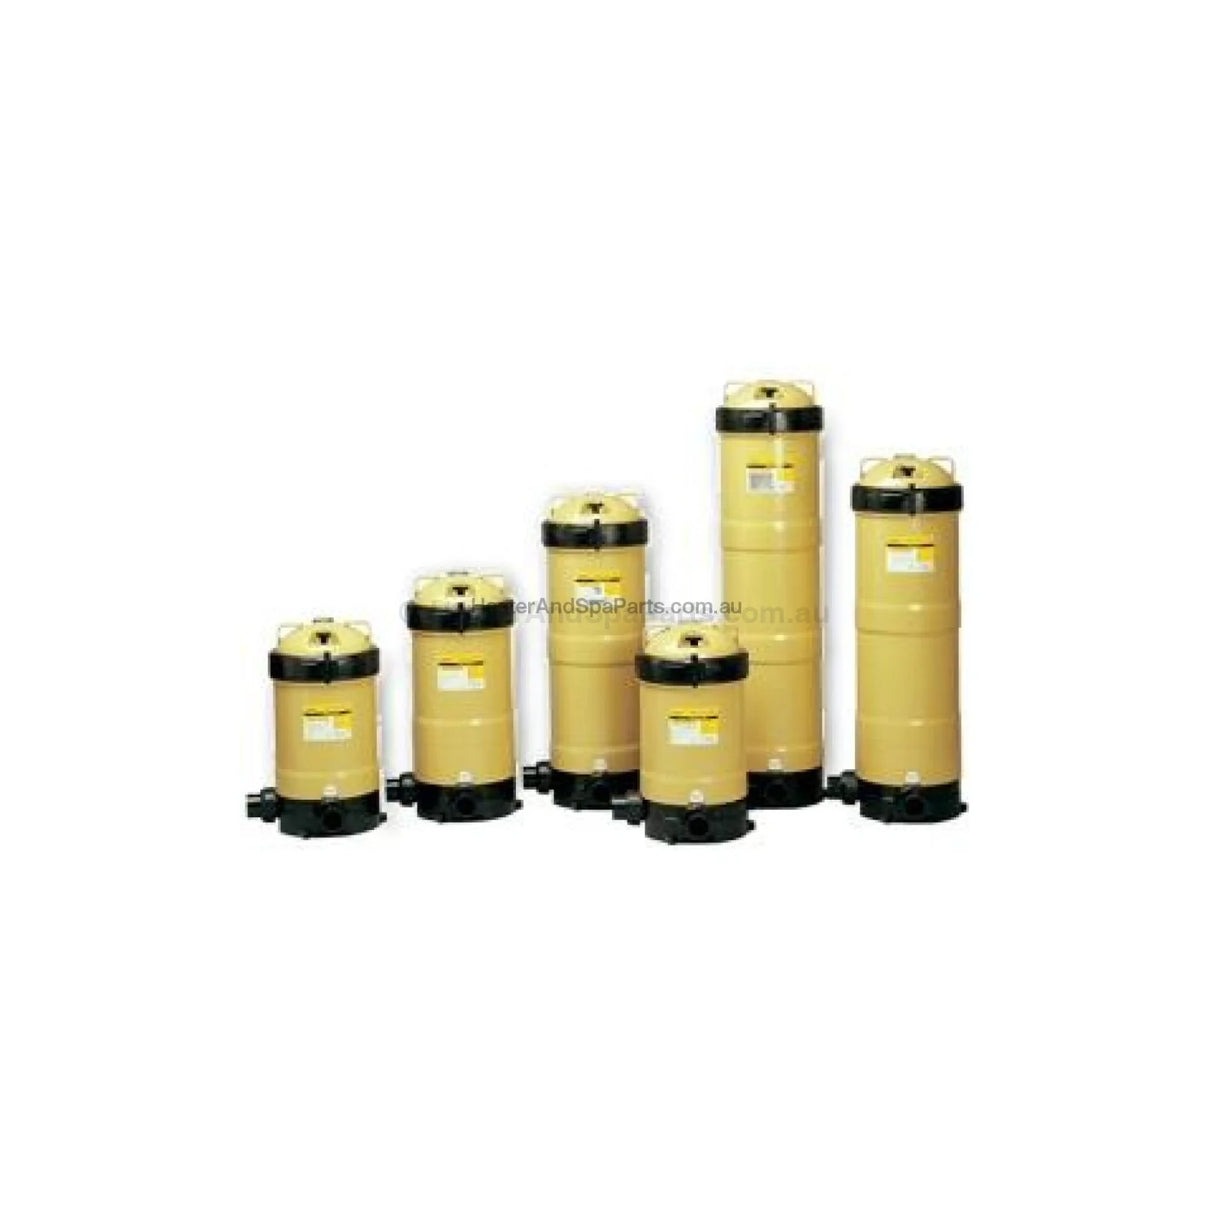 100ft² Davey SpaQuip Crystal Clear Cartridge Filter - replaces Easy Clear, Hendon, Monarch EcoPure - Heater and Spa Parts